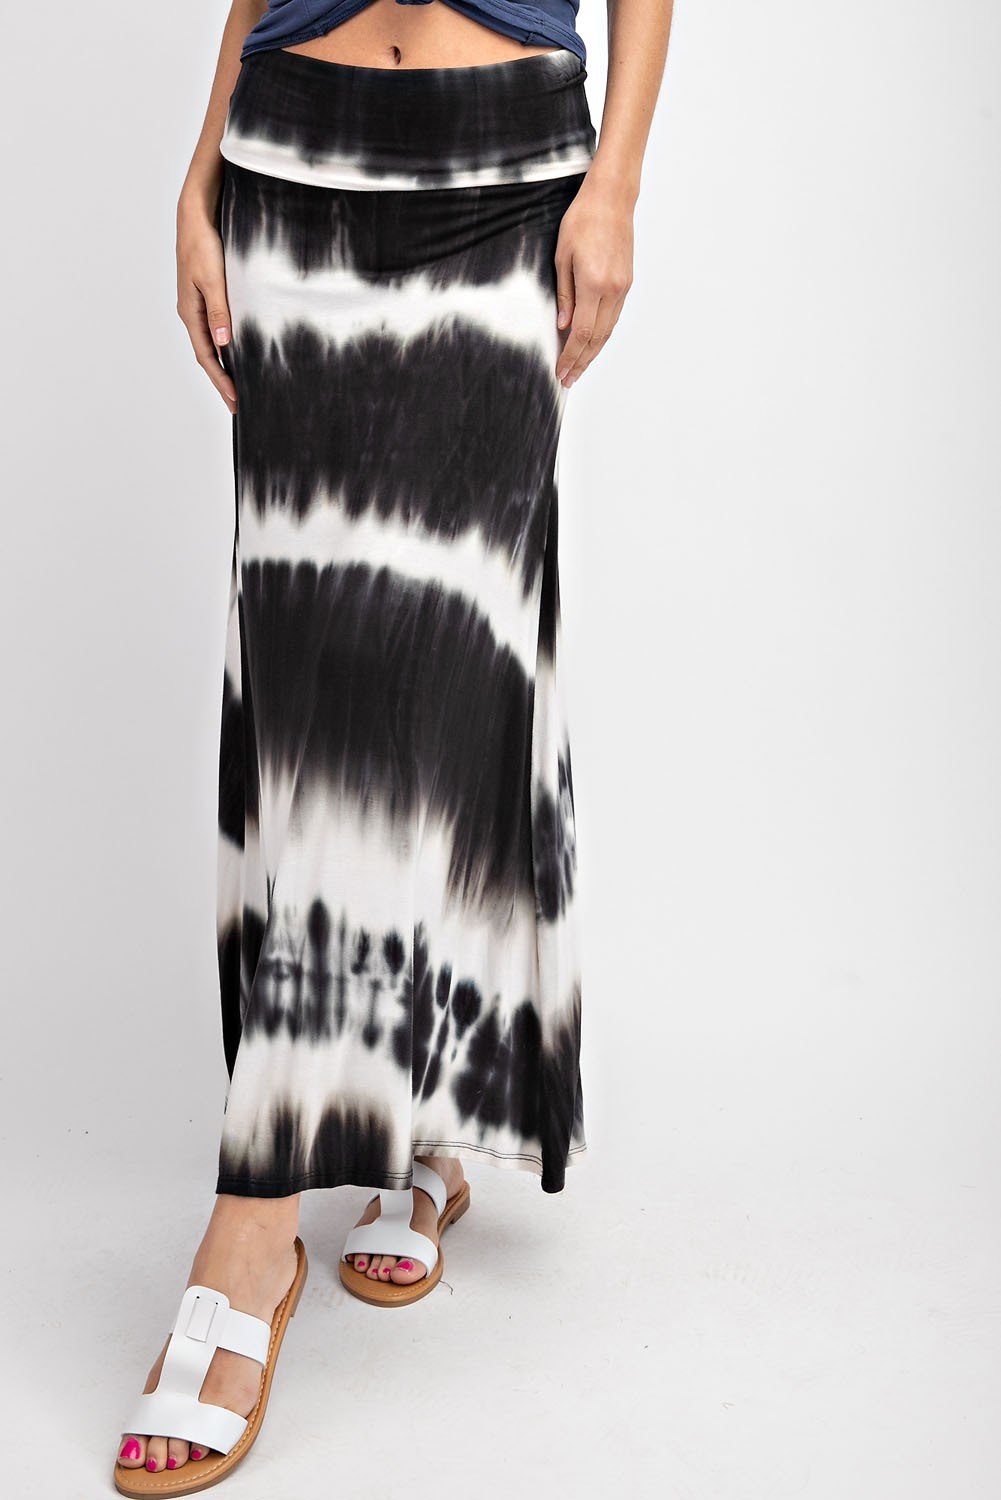 On The Move Tie Dye Maxi Skirt